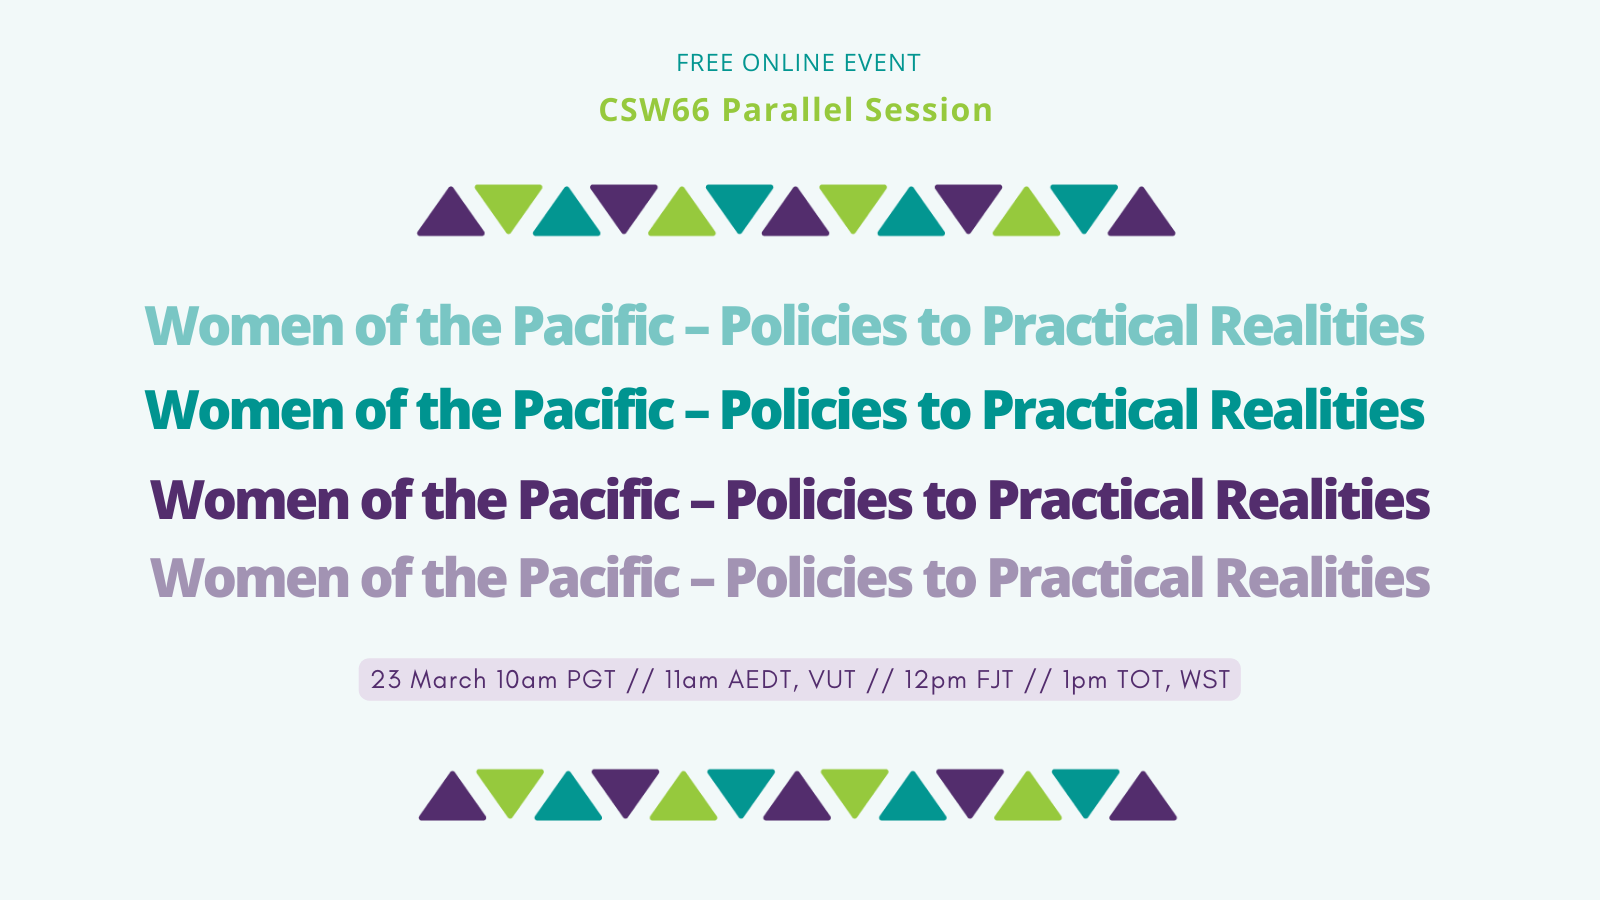 Free Online Session. CSW66 Parallel Session. Women of the Pacific - Policies to Practical Realities. 23 March 10am PGT // 11am AEDT, VUT // 12pm FJT // 1pm TOT, WST